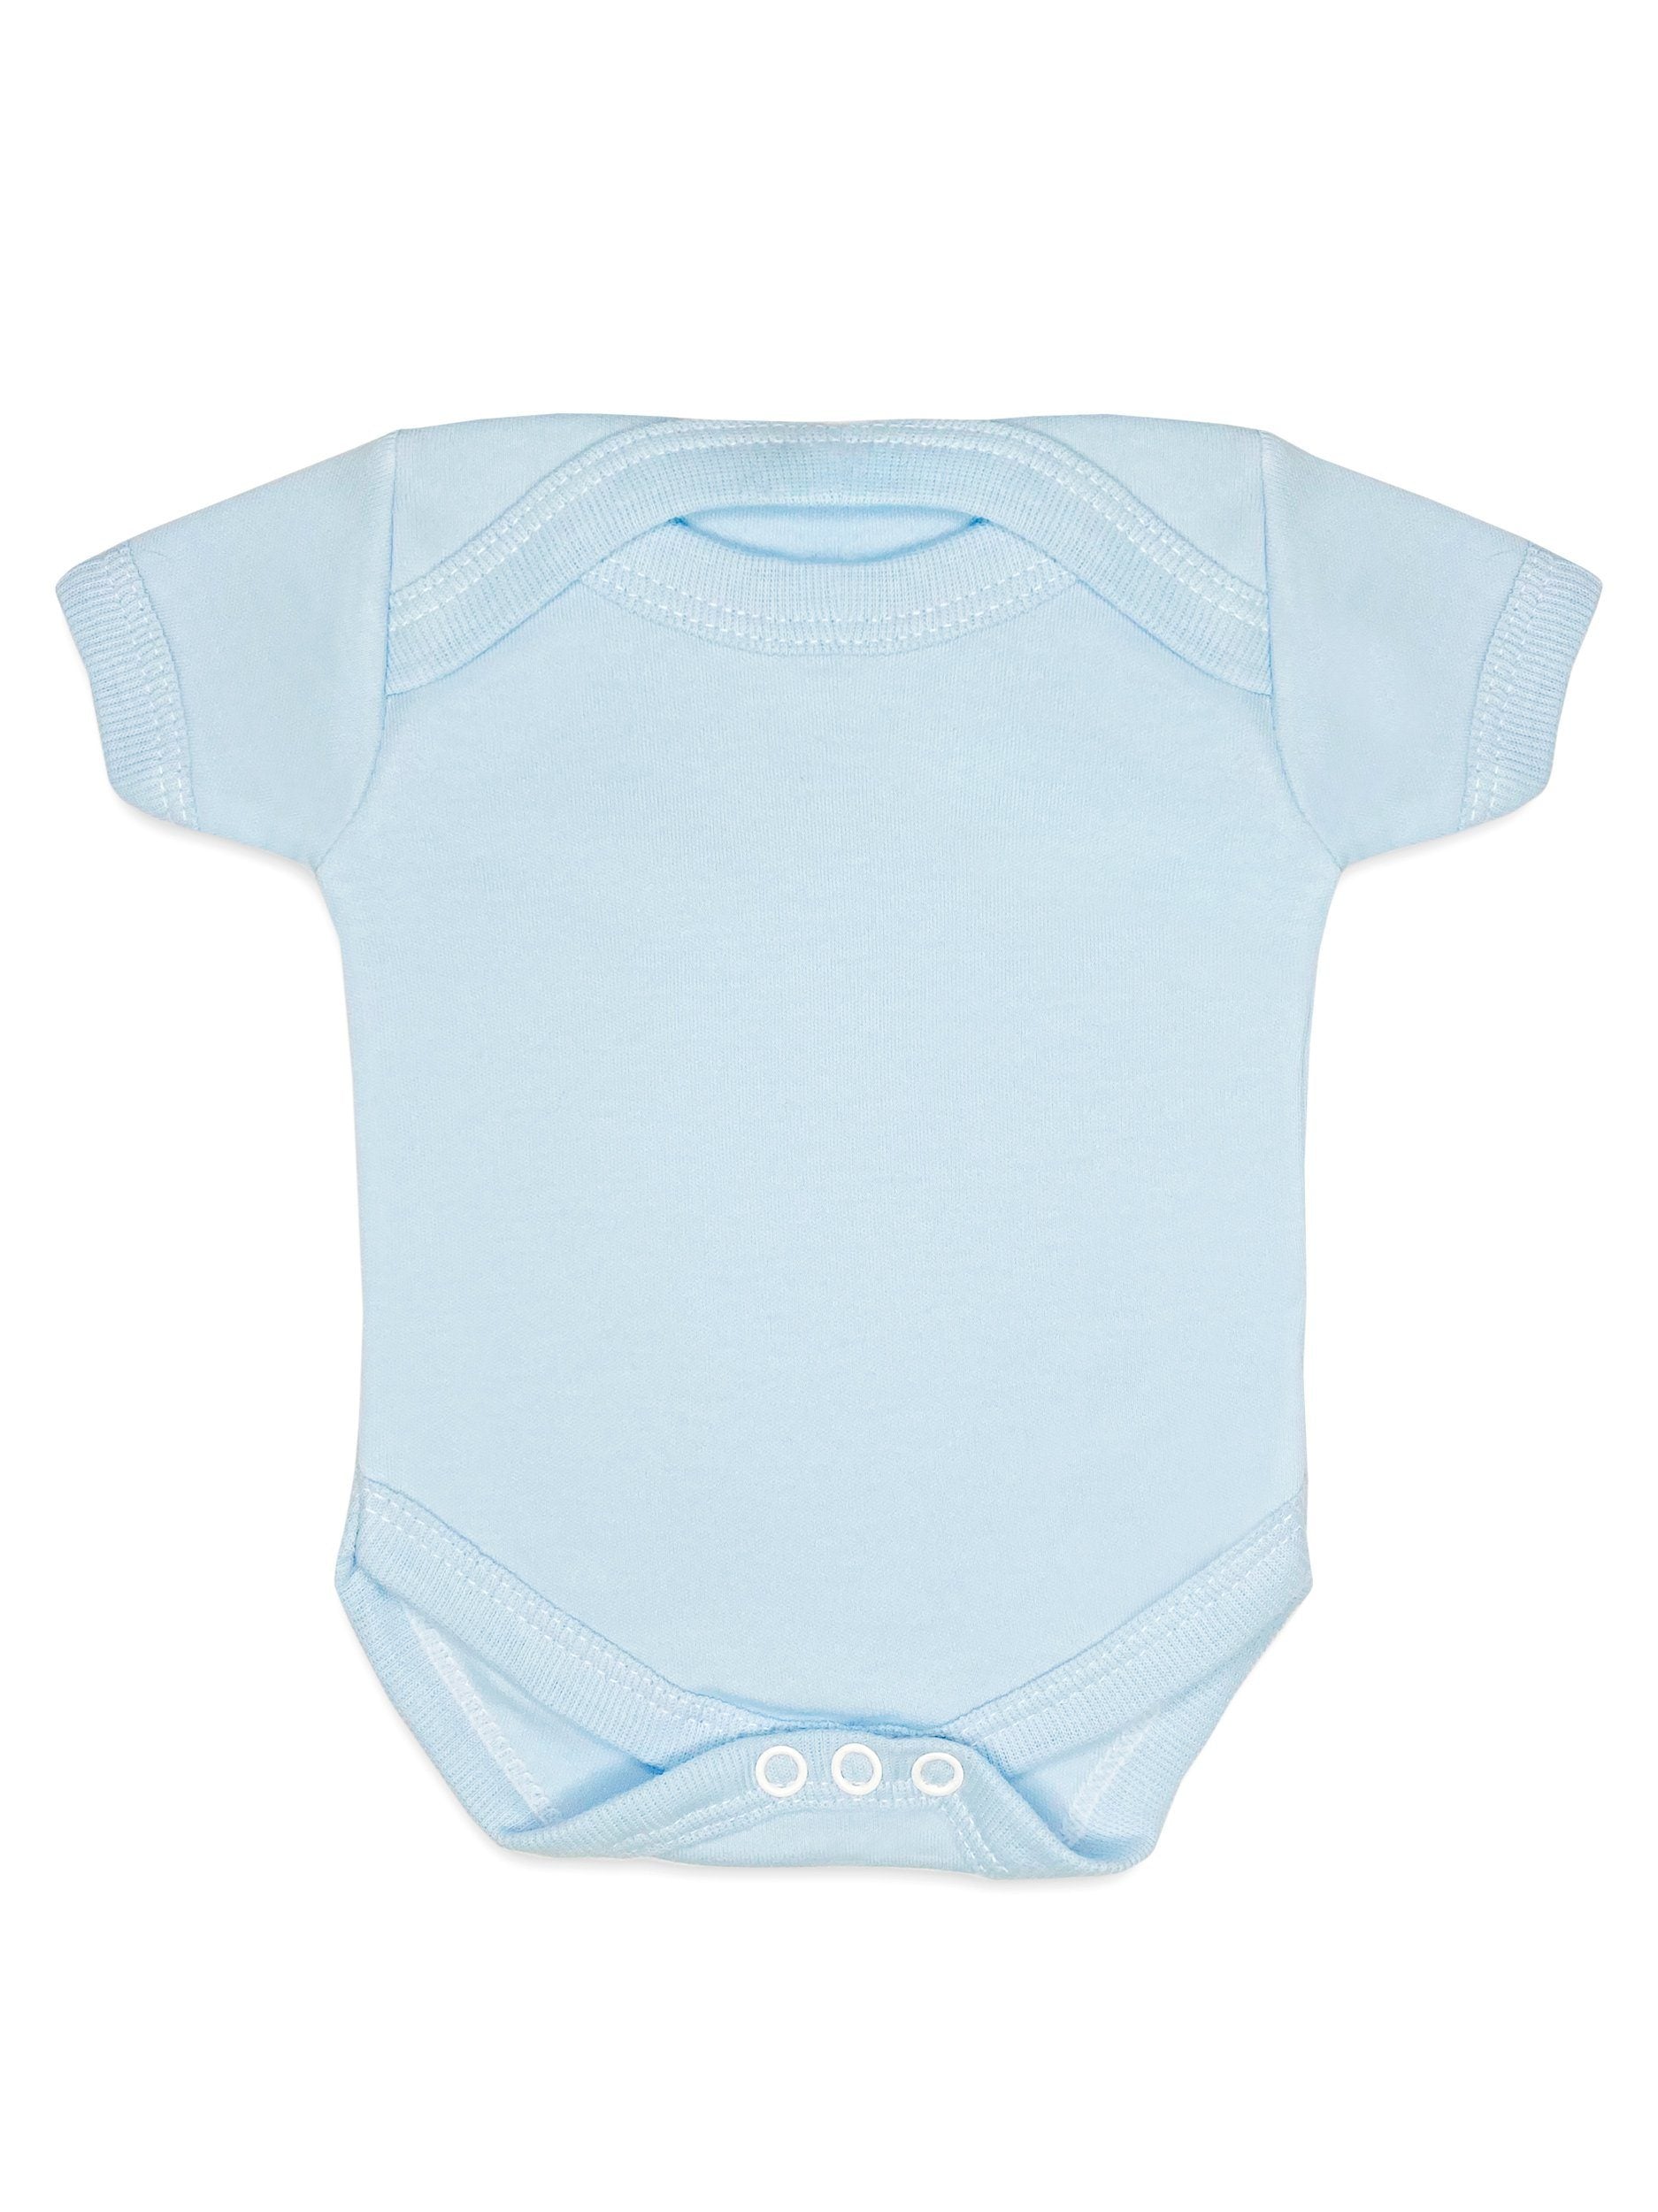 100% Cotton Classic Blue Short Sleeved Bodysuit (Early Baby, 3-5lb) - Bodysuit / Vest - Little Mouse Baby Clothing & Gifts